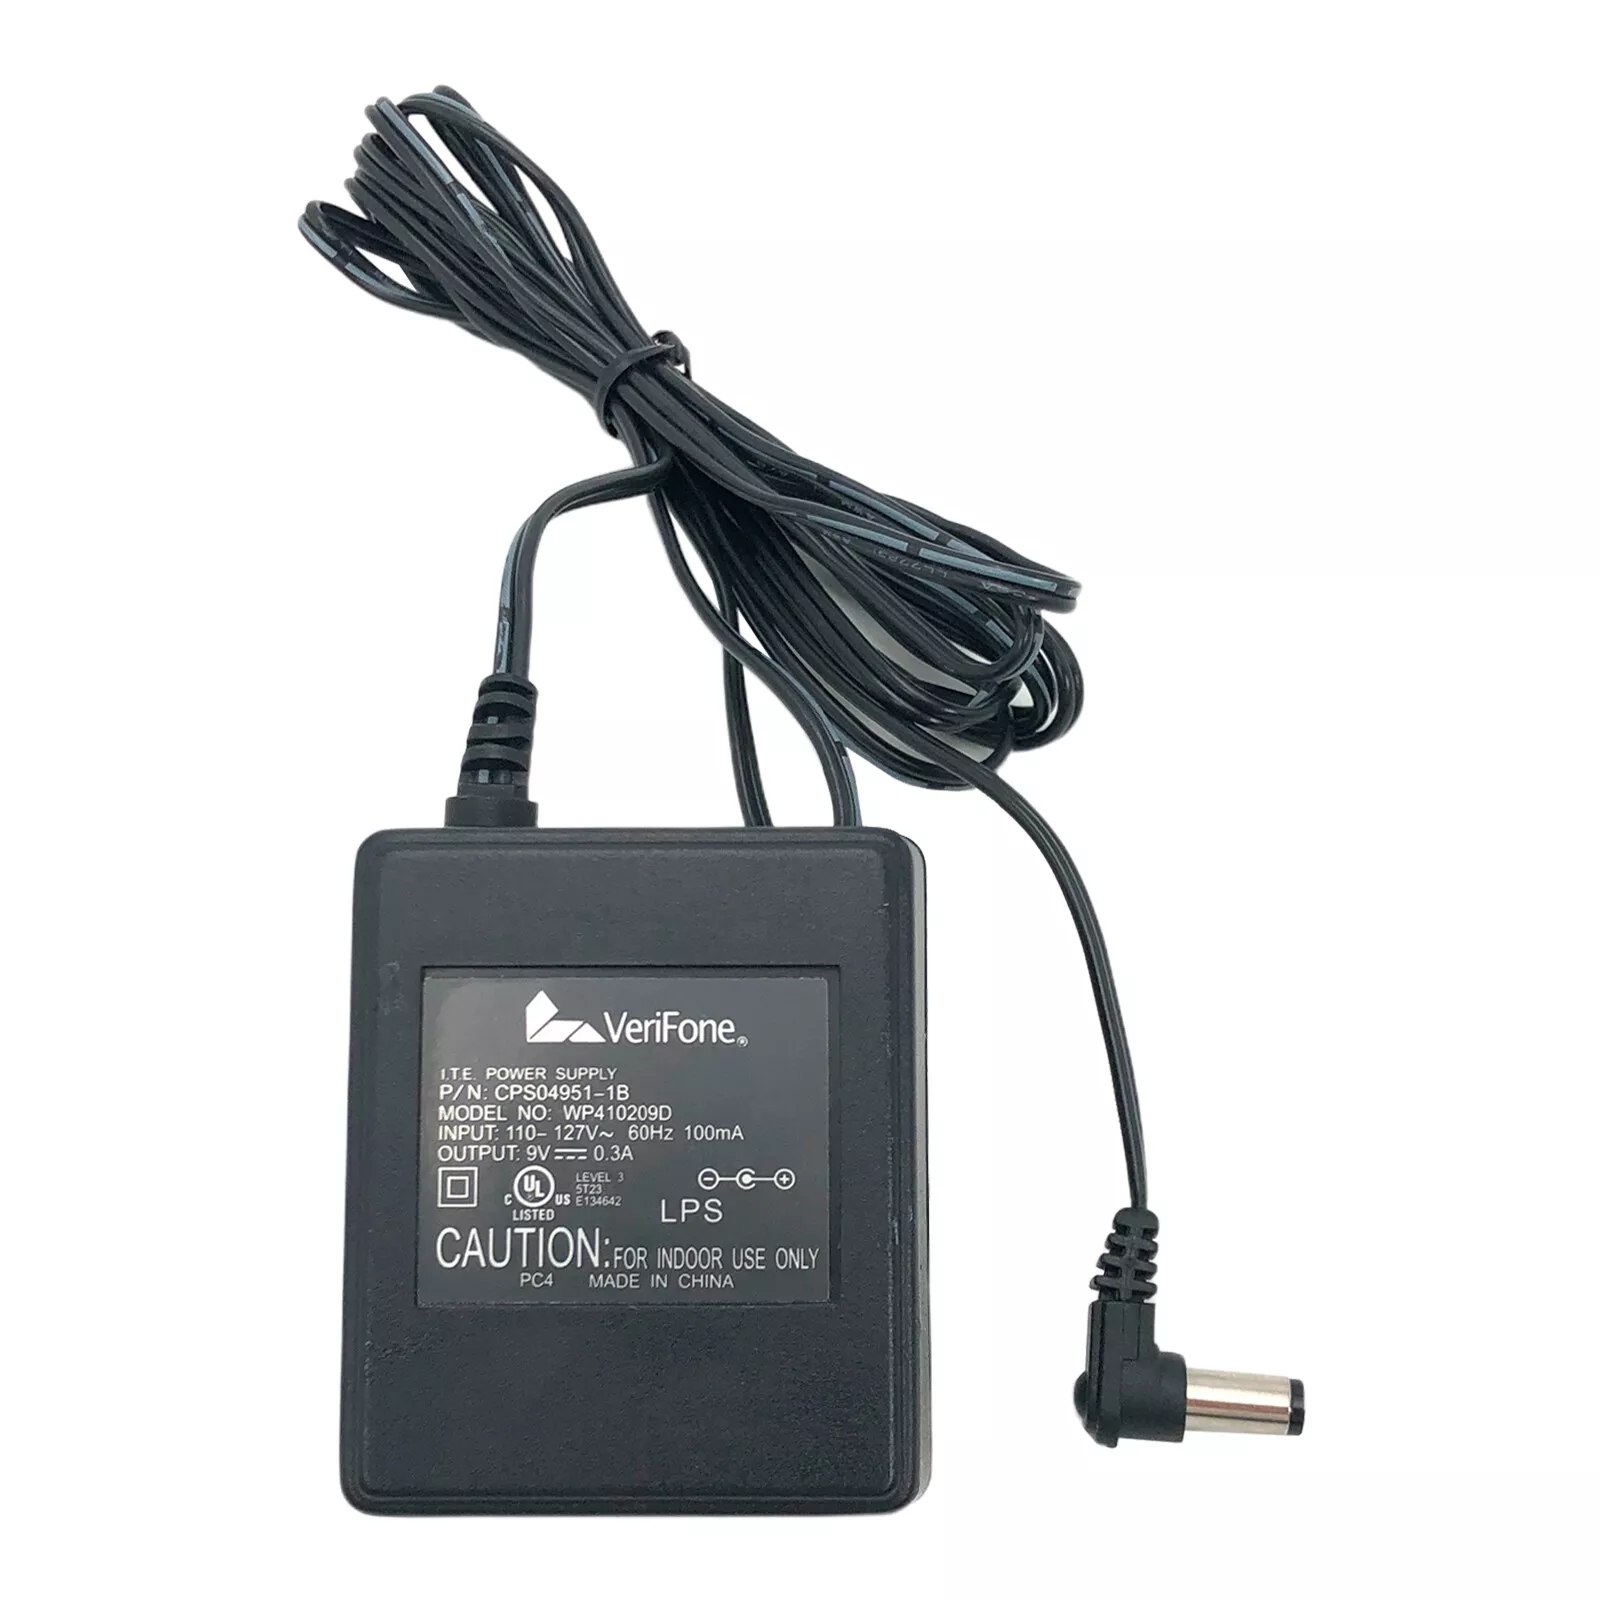 *Brand NEW*Genuine VeriFone WP410209D 9V 0.3A AC Adapter CPS04951-1B Power Supply - Click Image to Close